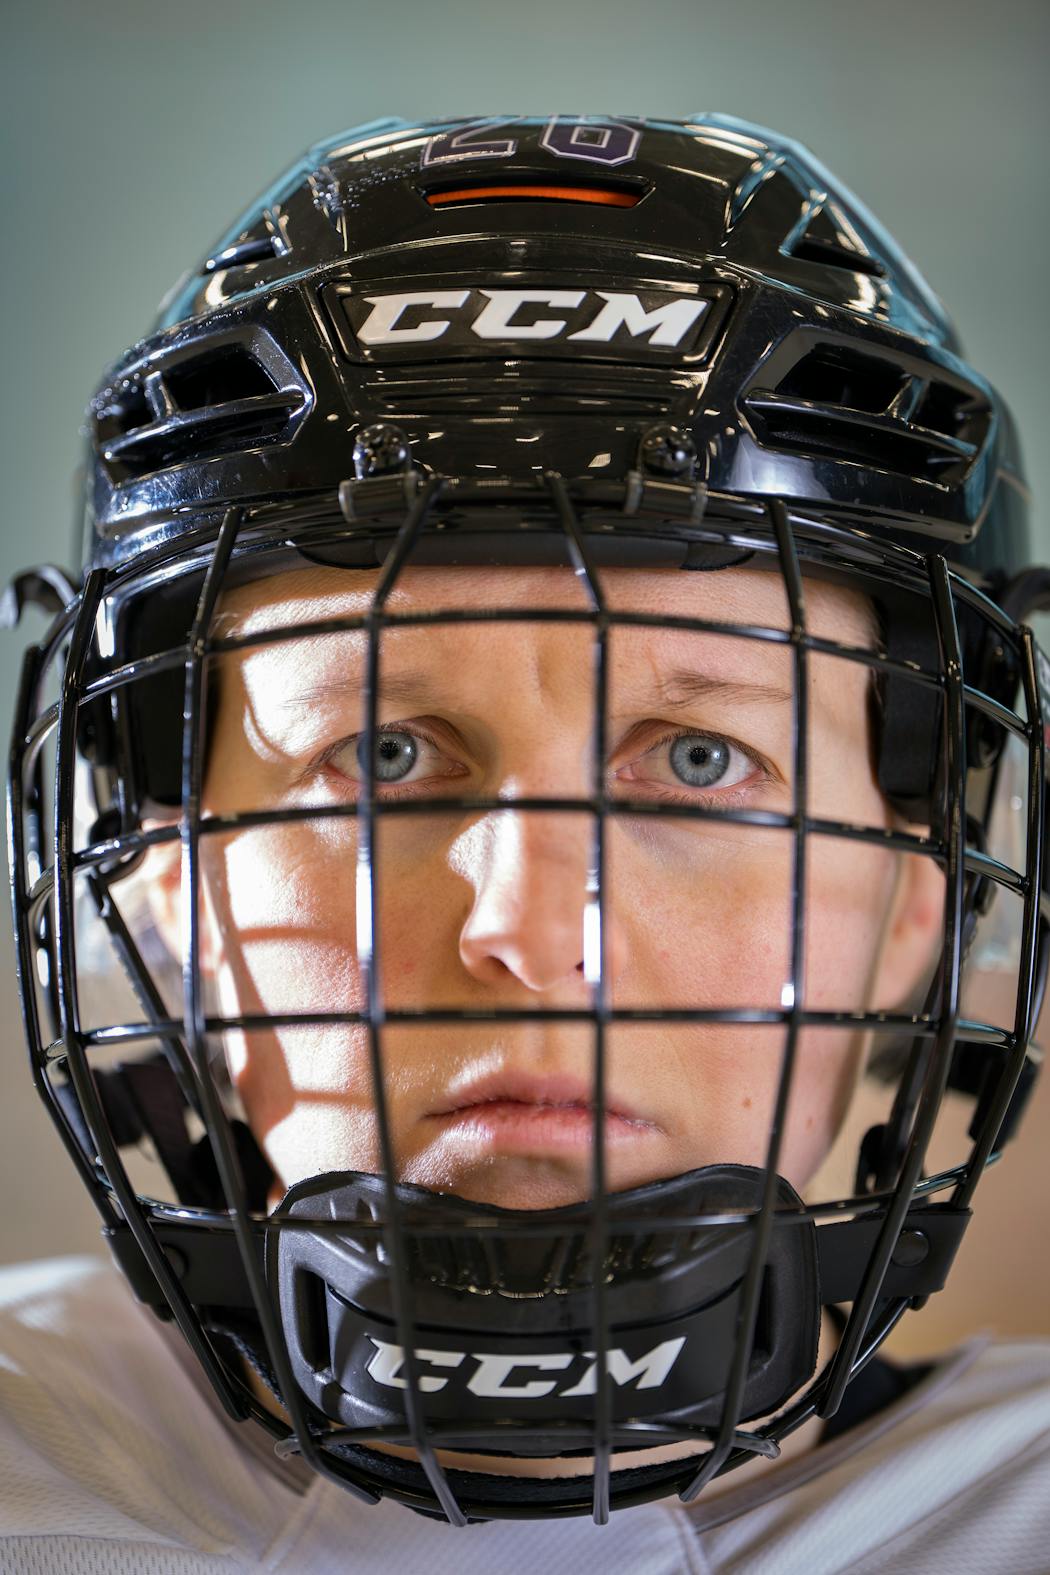 PWHL Minnesota player Kendall Coyne Schofield posed for a portrait after practice at Tria Rink in St. Paul on Jan. 12.